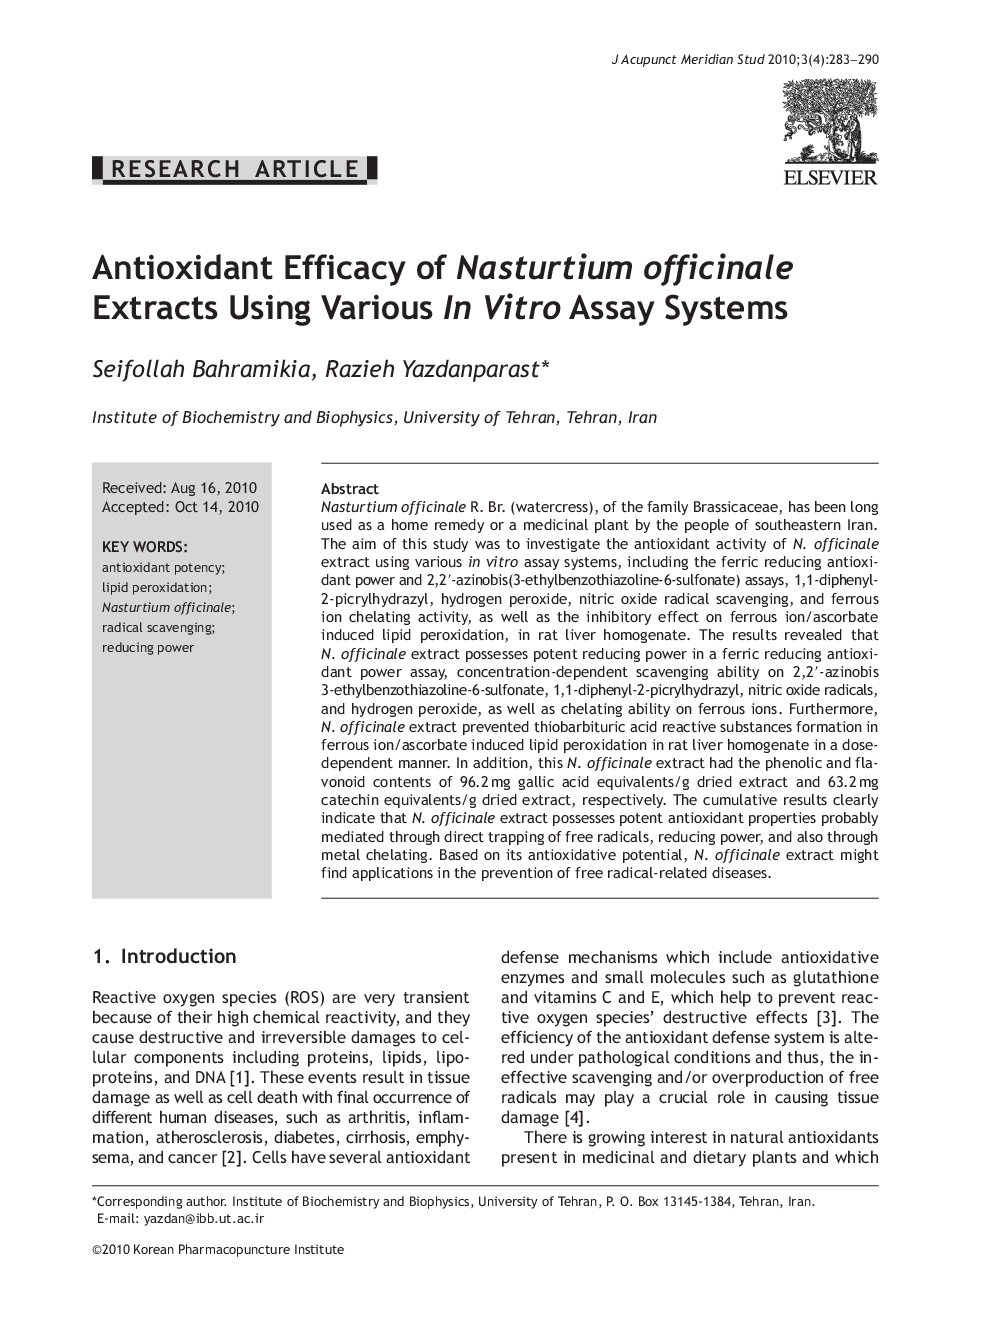 Antioxidant Efficacy of Nasturtium officinale Extracts Using Various In Vitro Assay Systems